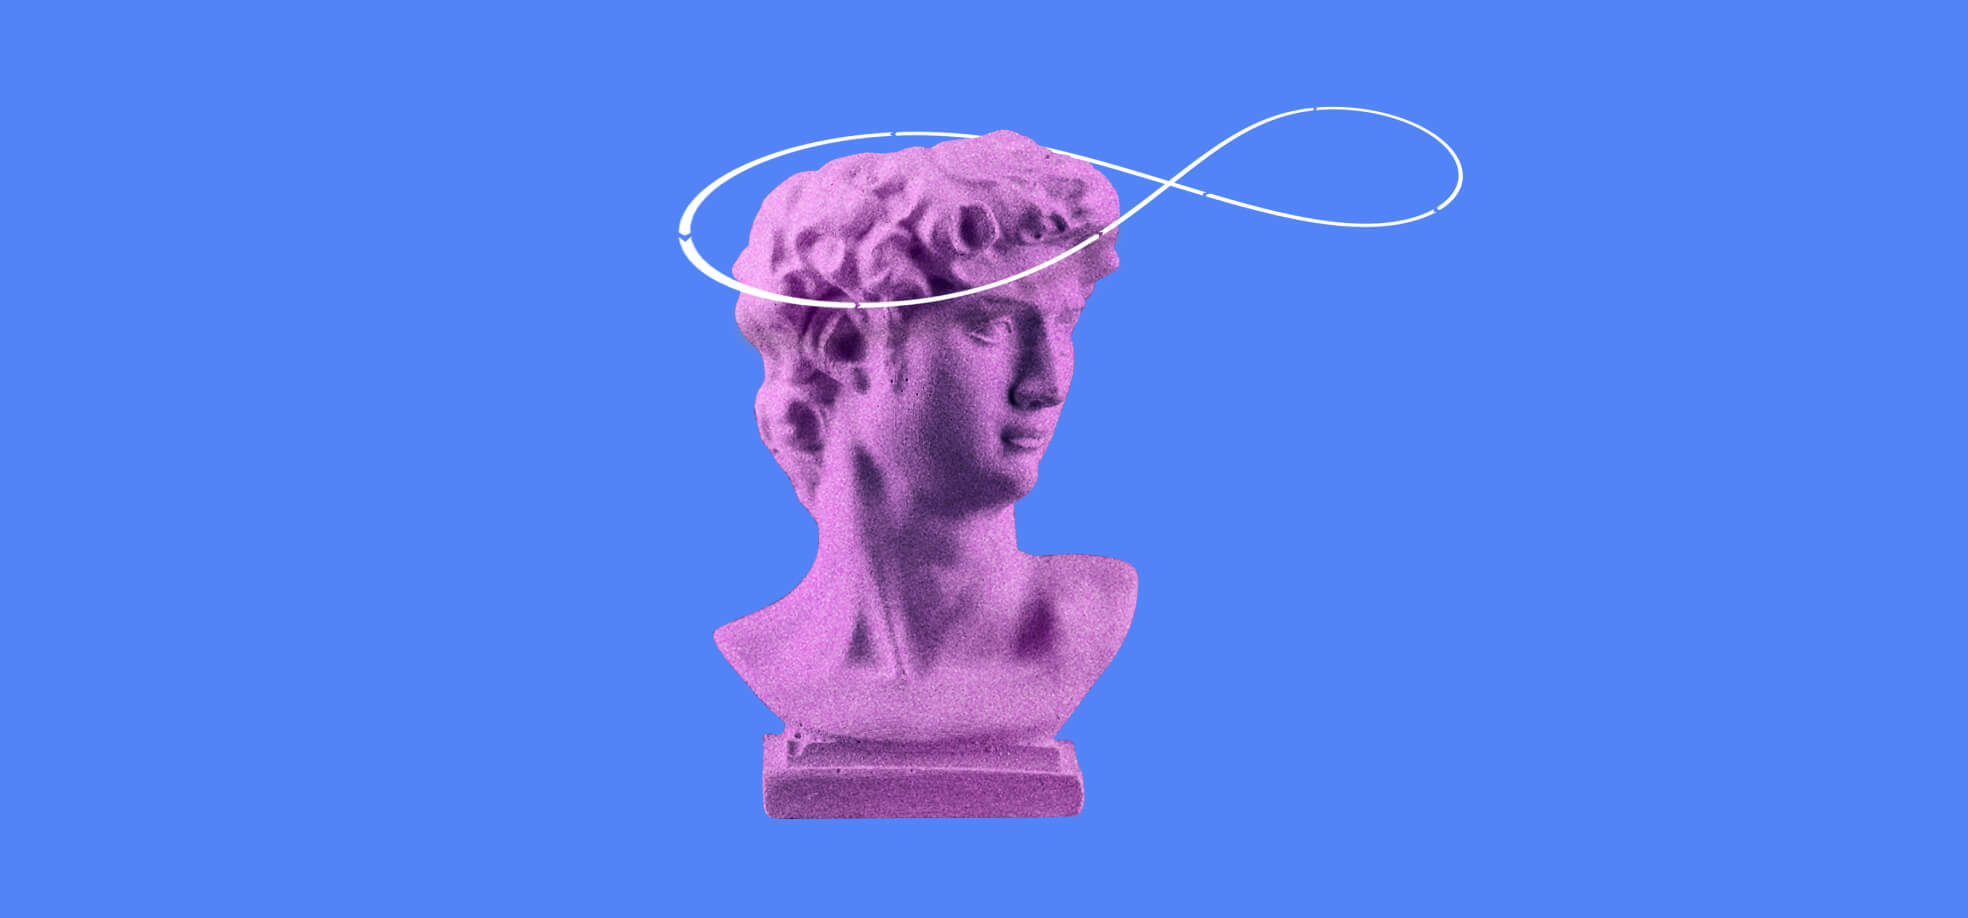 illustration of a Bust of David on a blue background